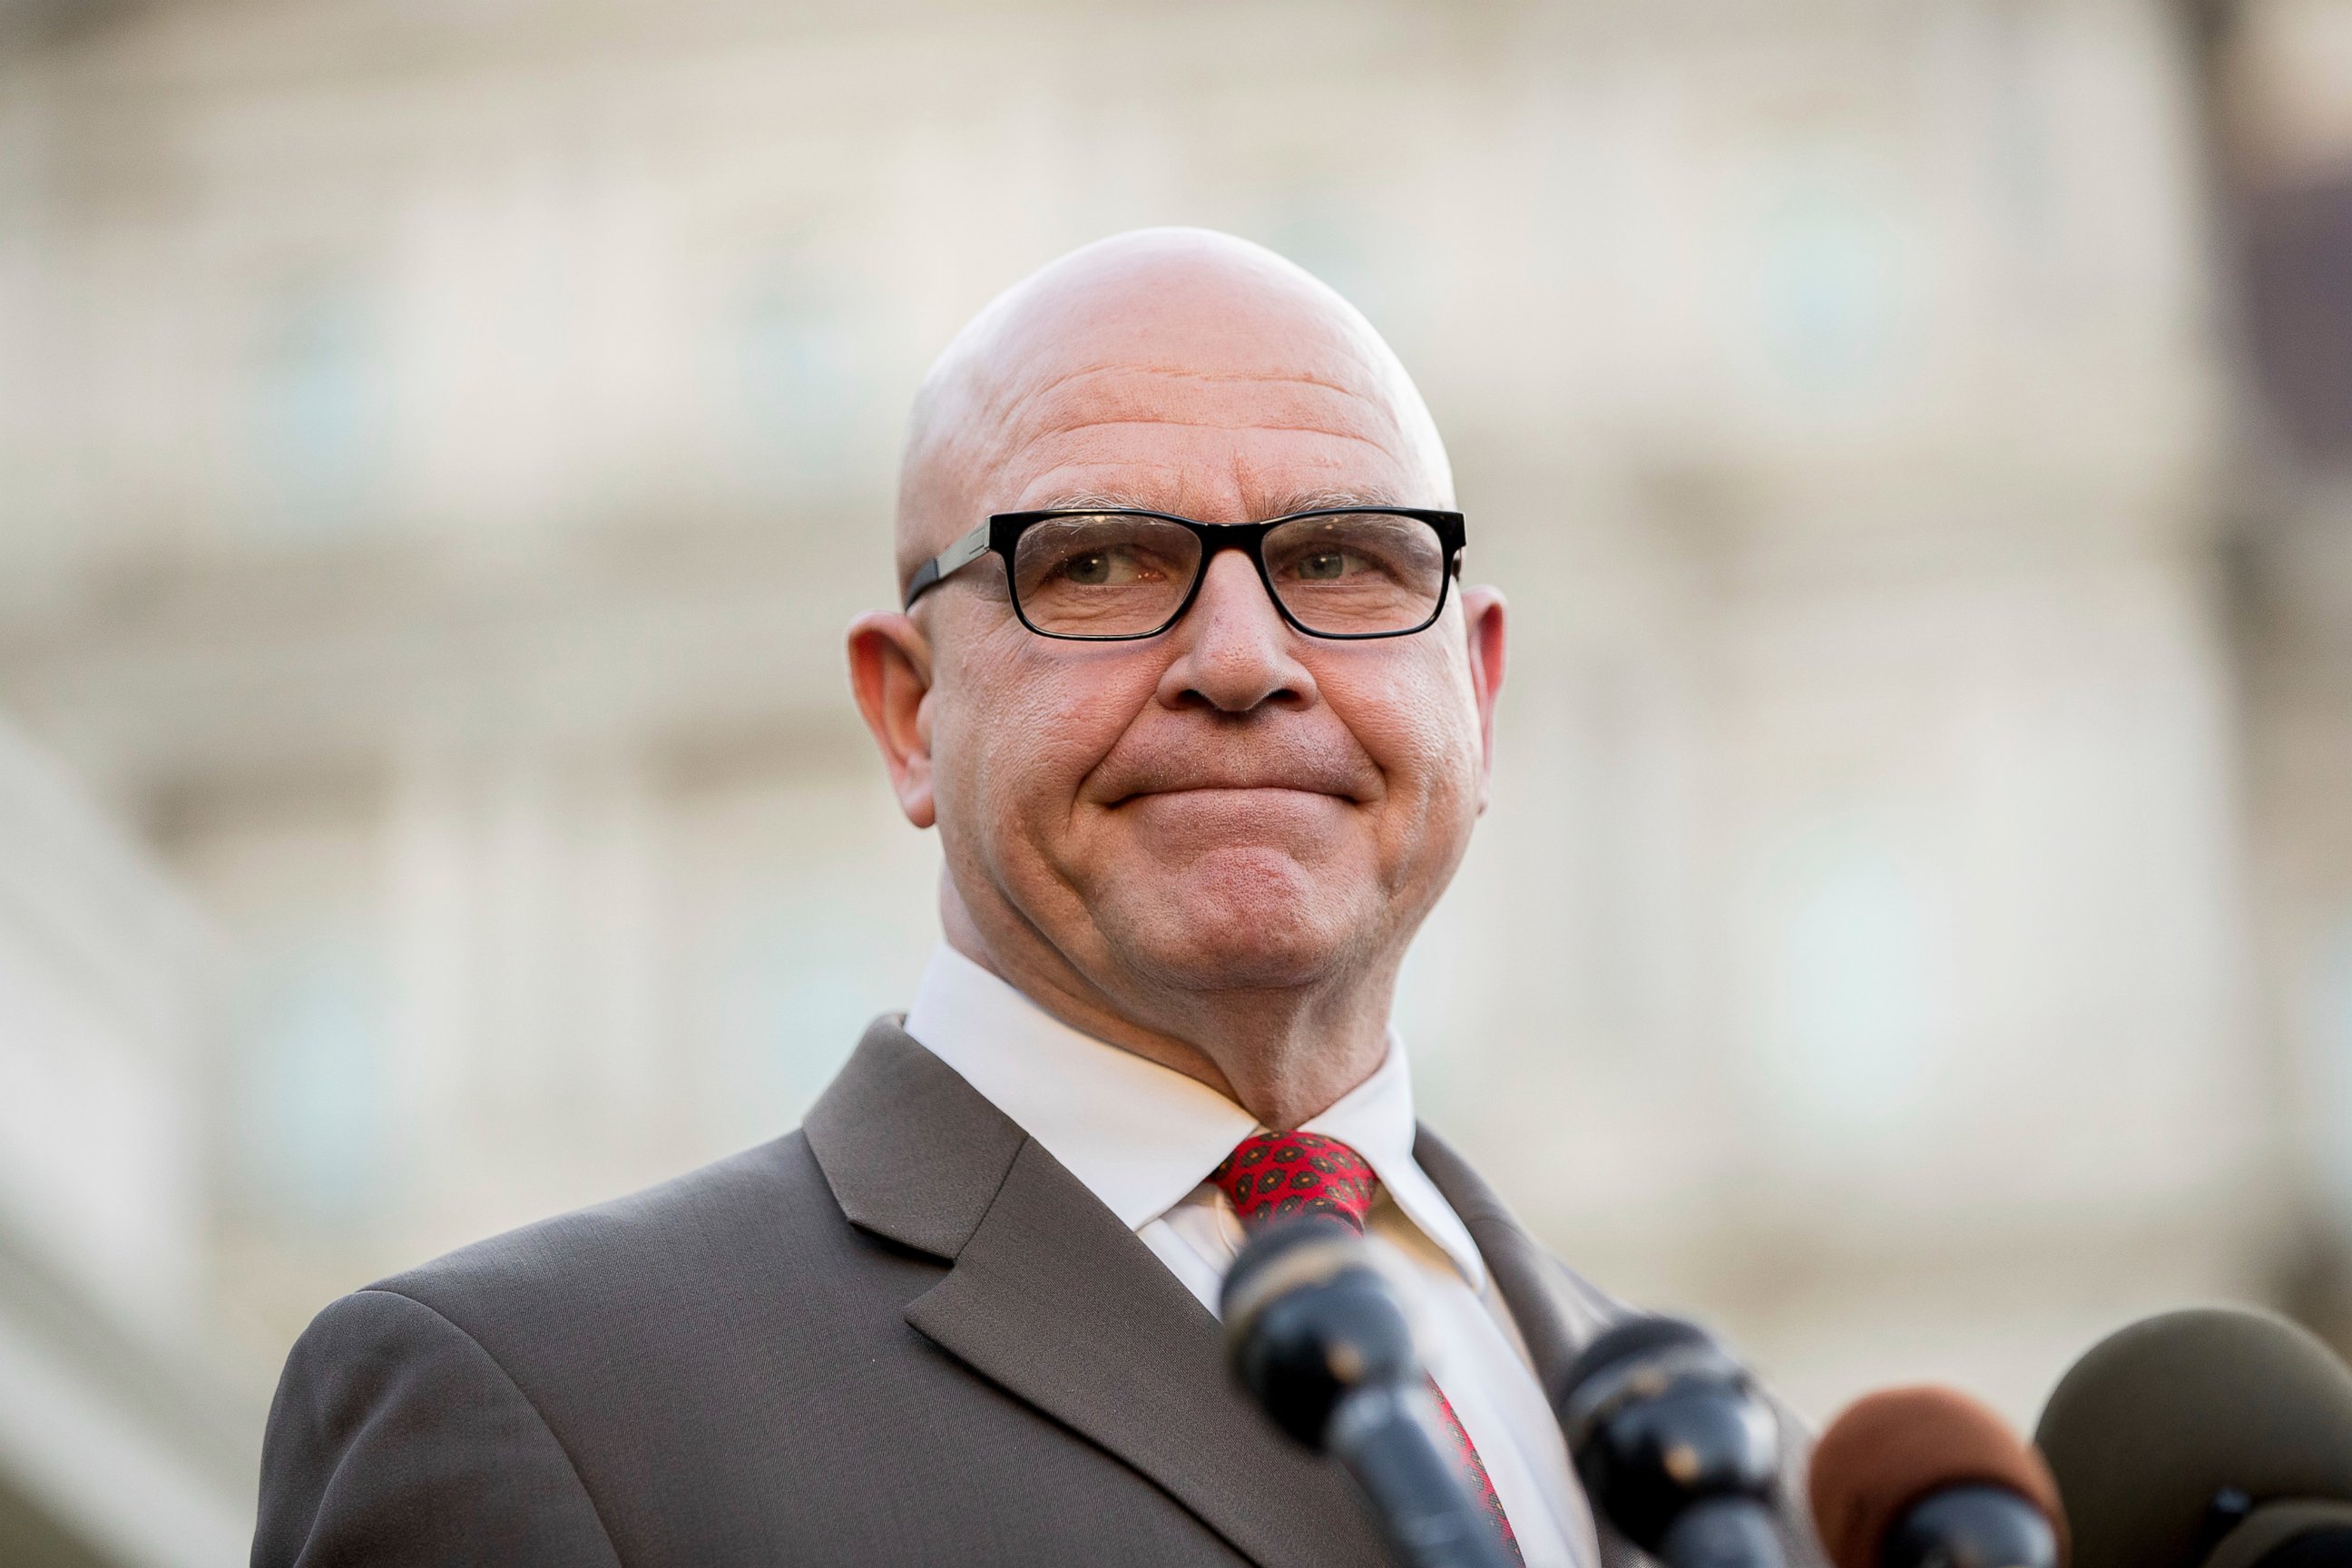 PHOTO: National Security Adviser H.R. McMaster pauses while speaking to members of the media outside the West Wing of the White House, May 15, 2017, in Washington, D.C.